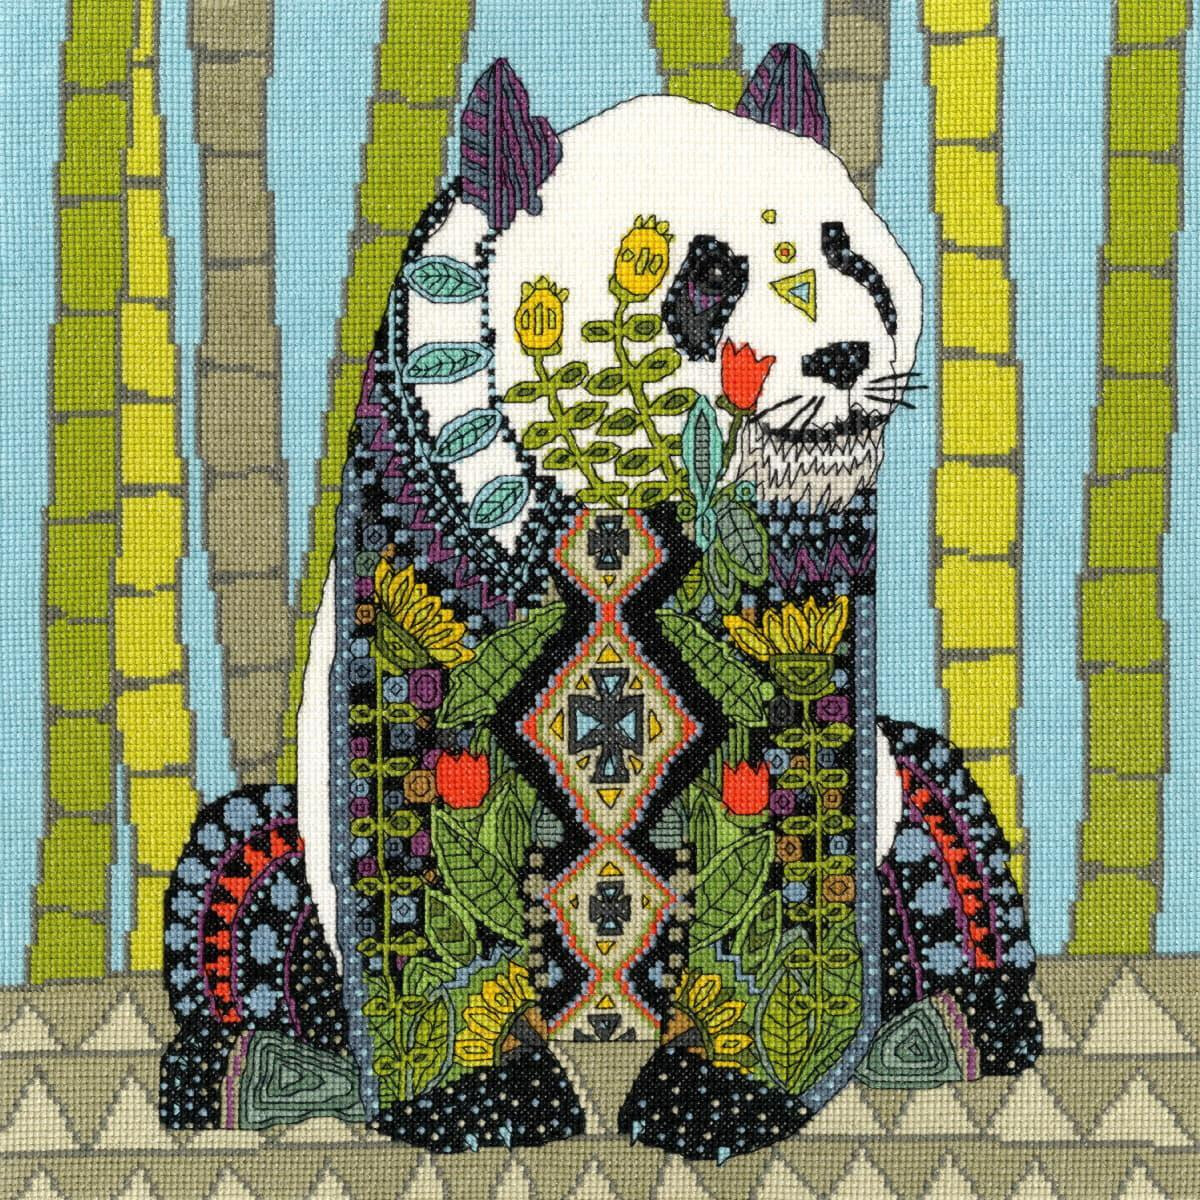 A colorful, intricately patterned artwork of a panda...